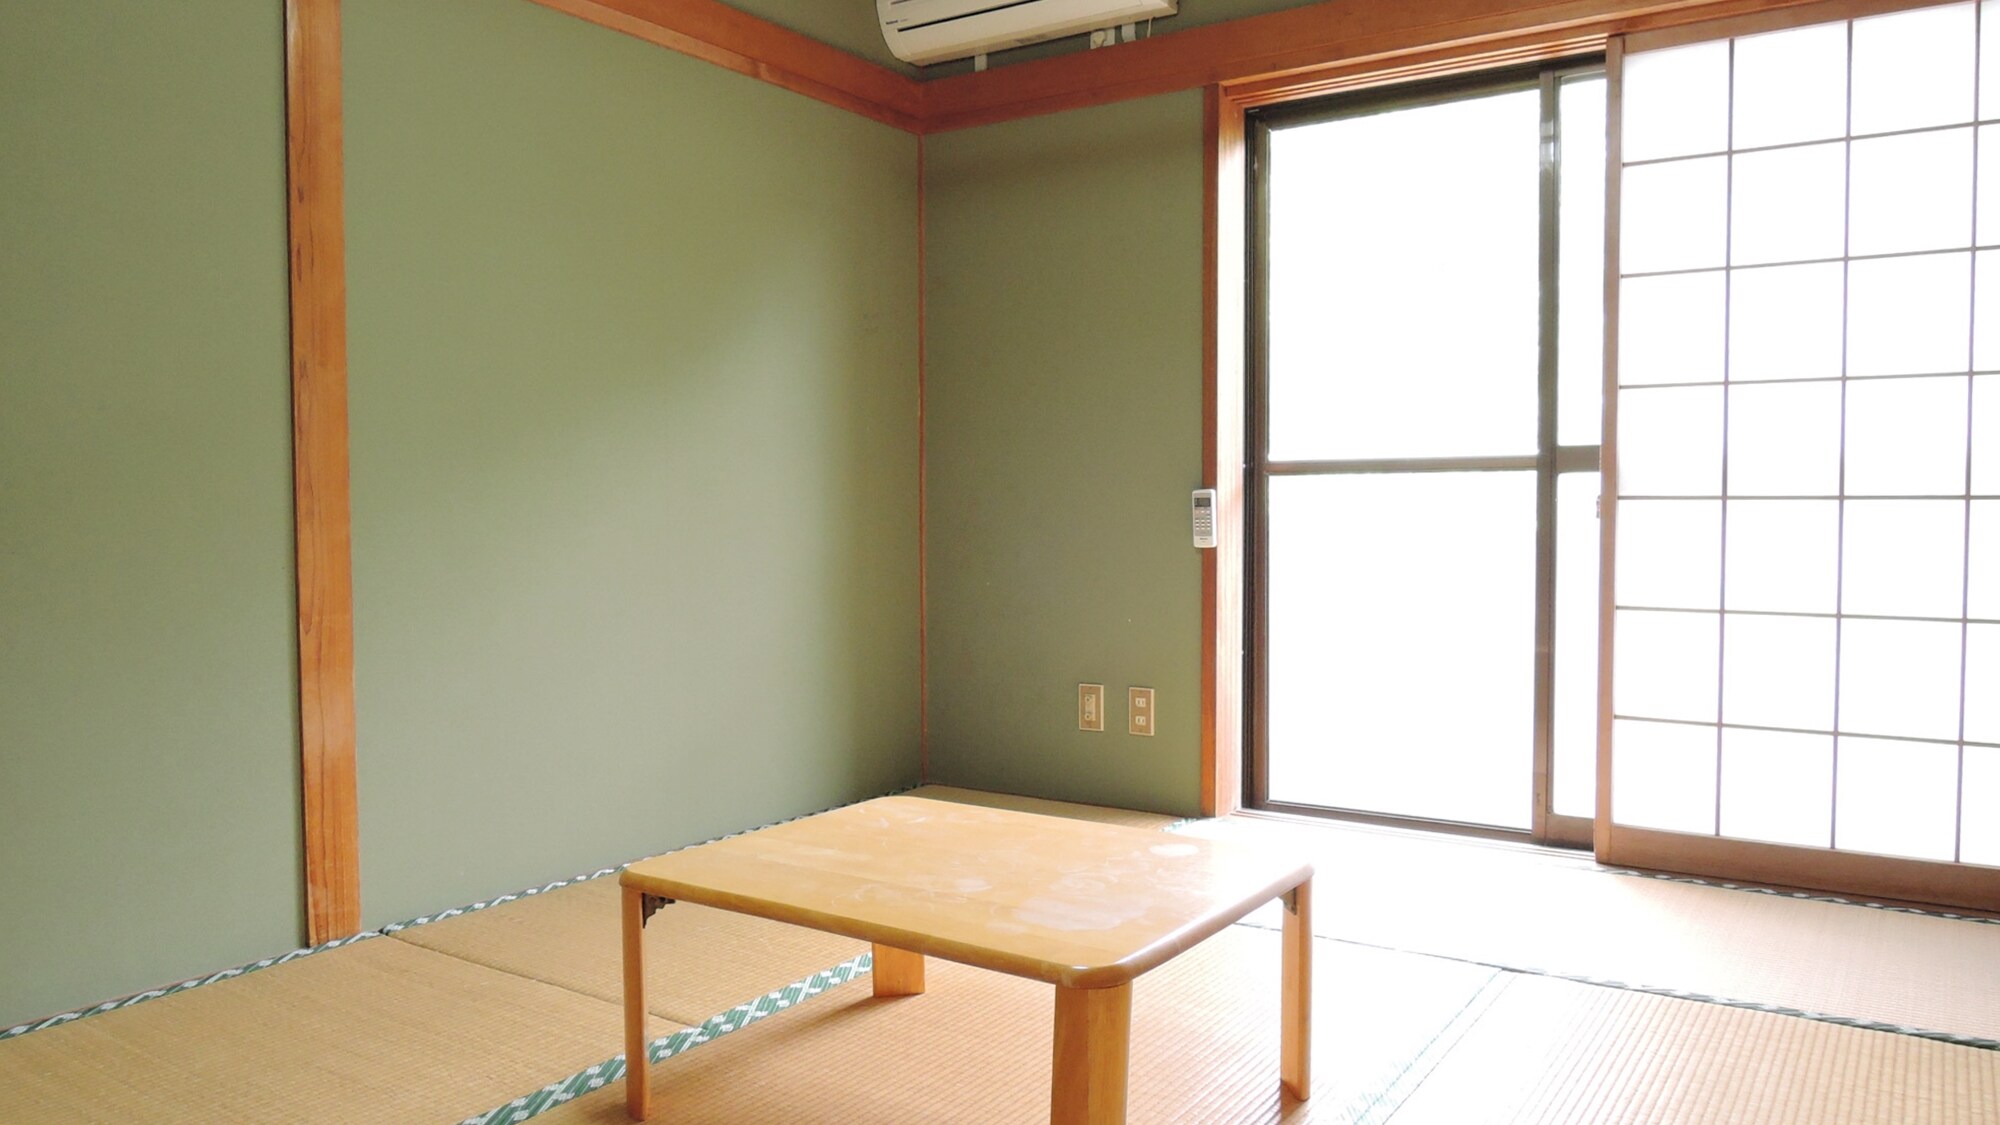 * A Japanese-style room with 6 tatami mats / A simple tatami room.